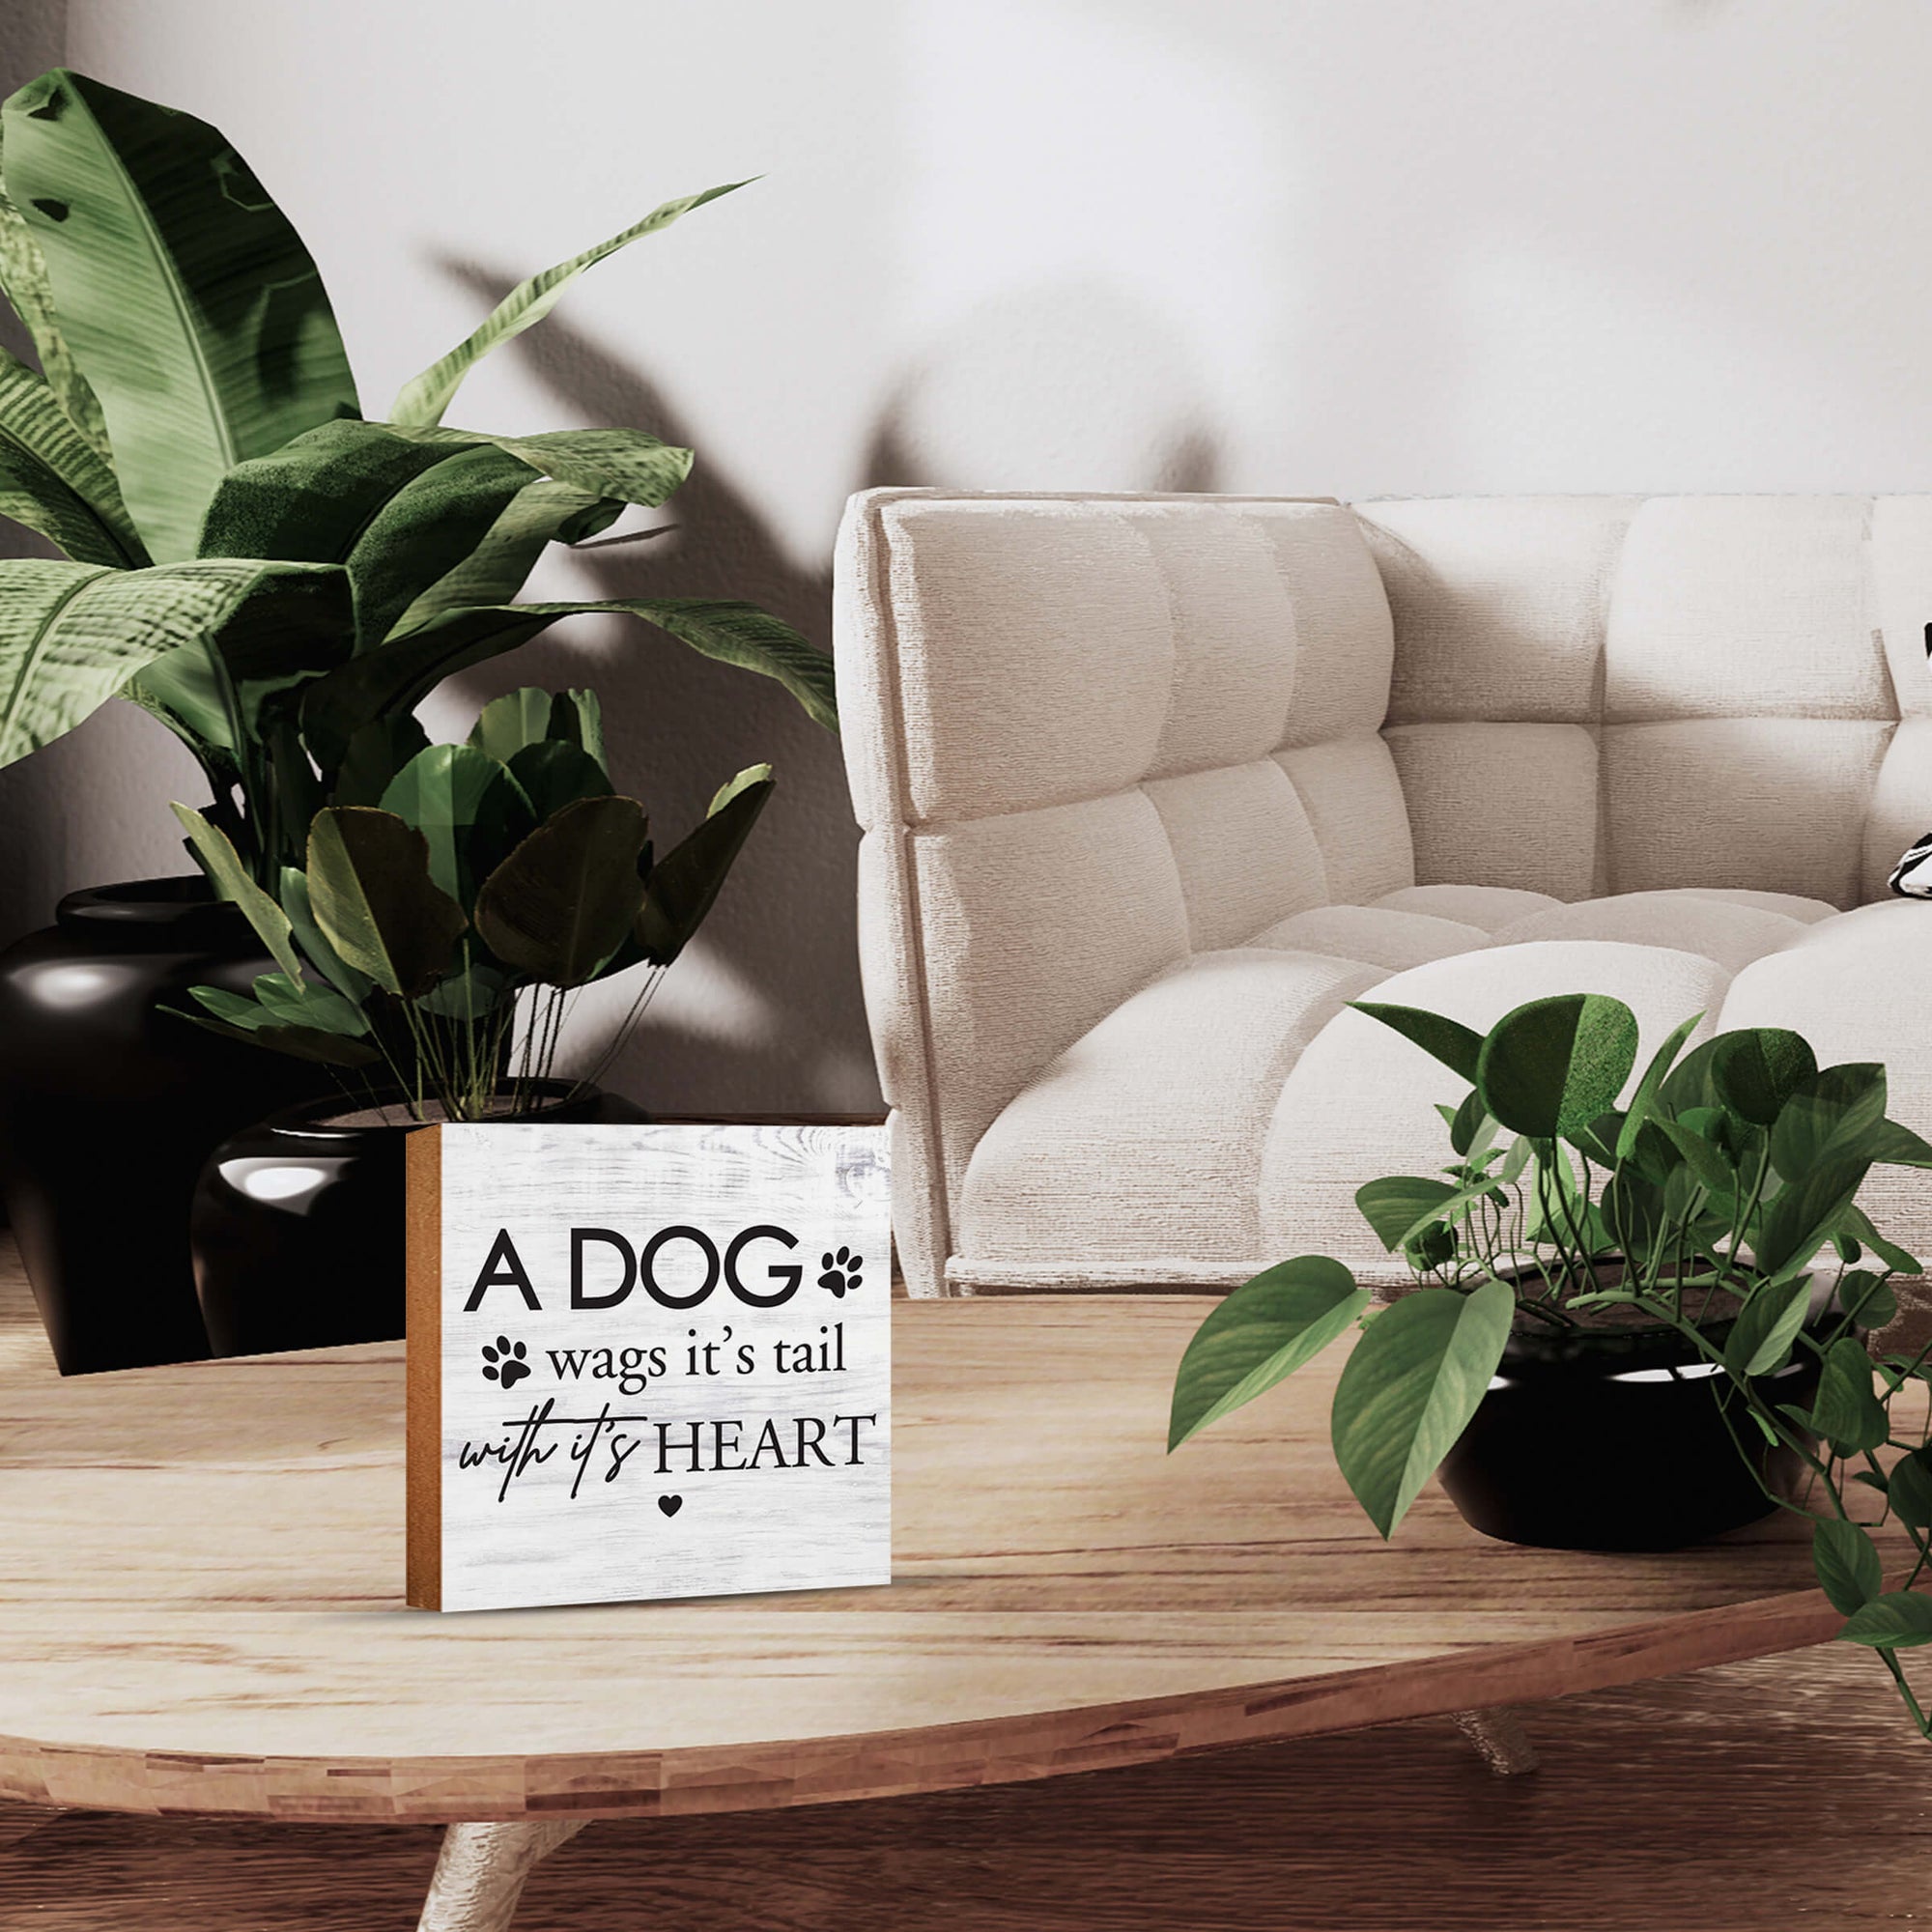 Wooden Shelf Decor and Tabletop Signs with Pet Verses - A Dog Wags Its Tail